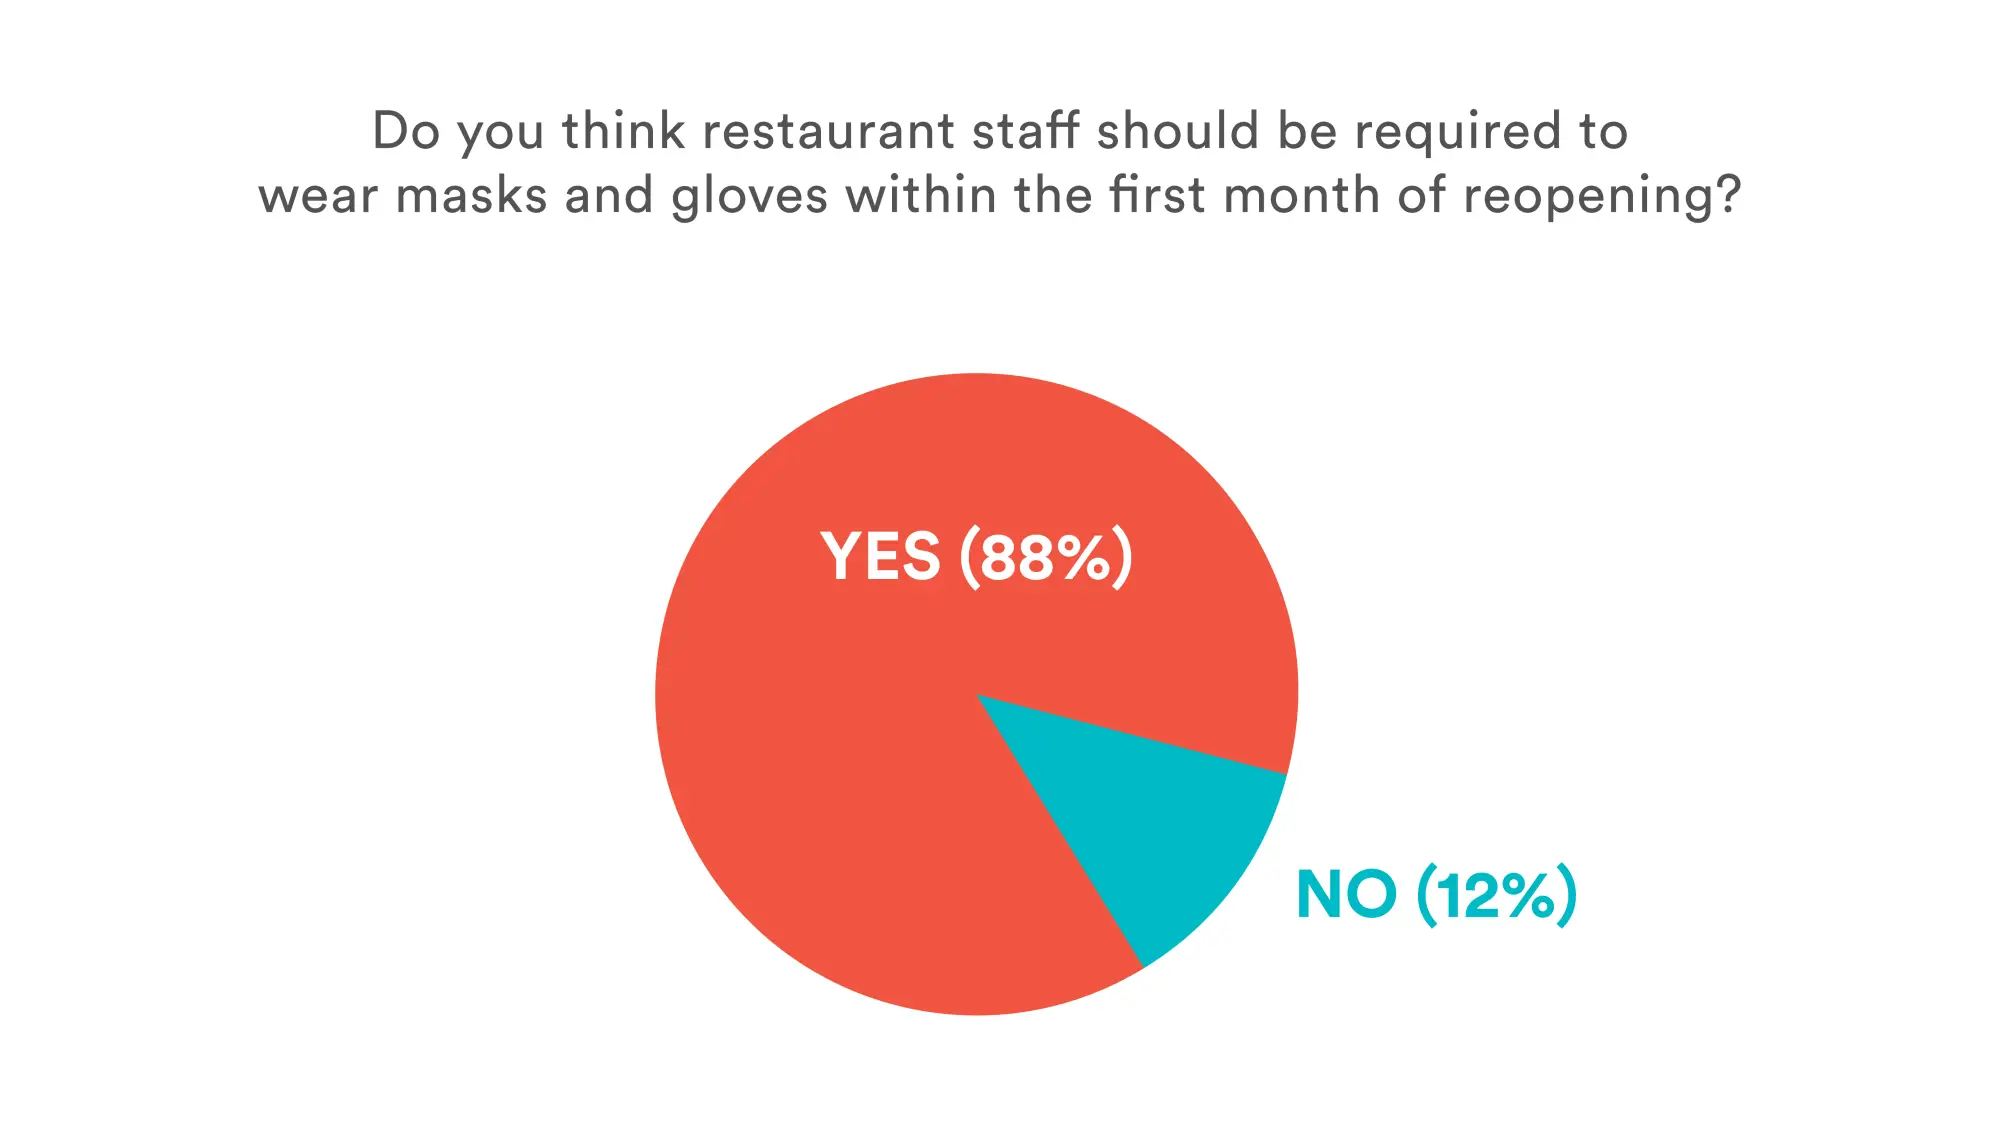 Restaurant Reopening Data: Should restaurant staff be required to wear personal protective equipment (PPE)